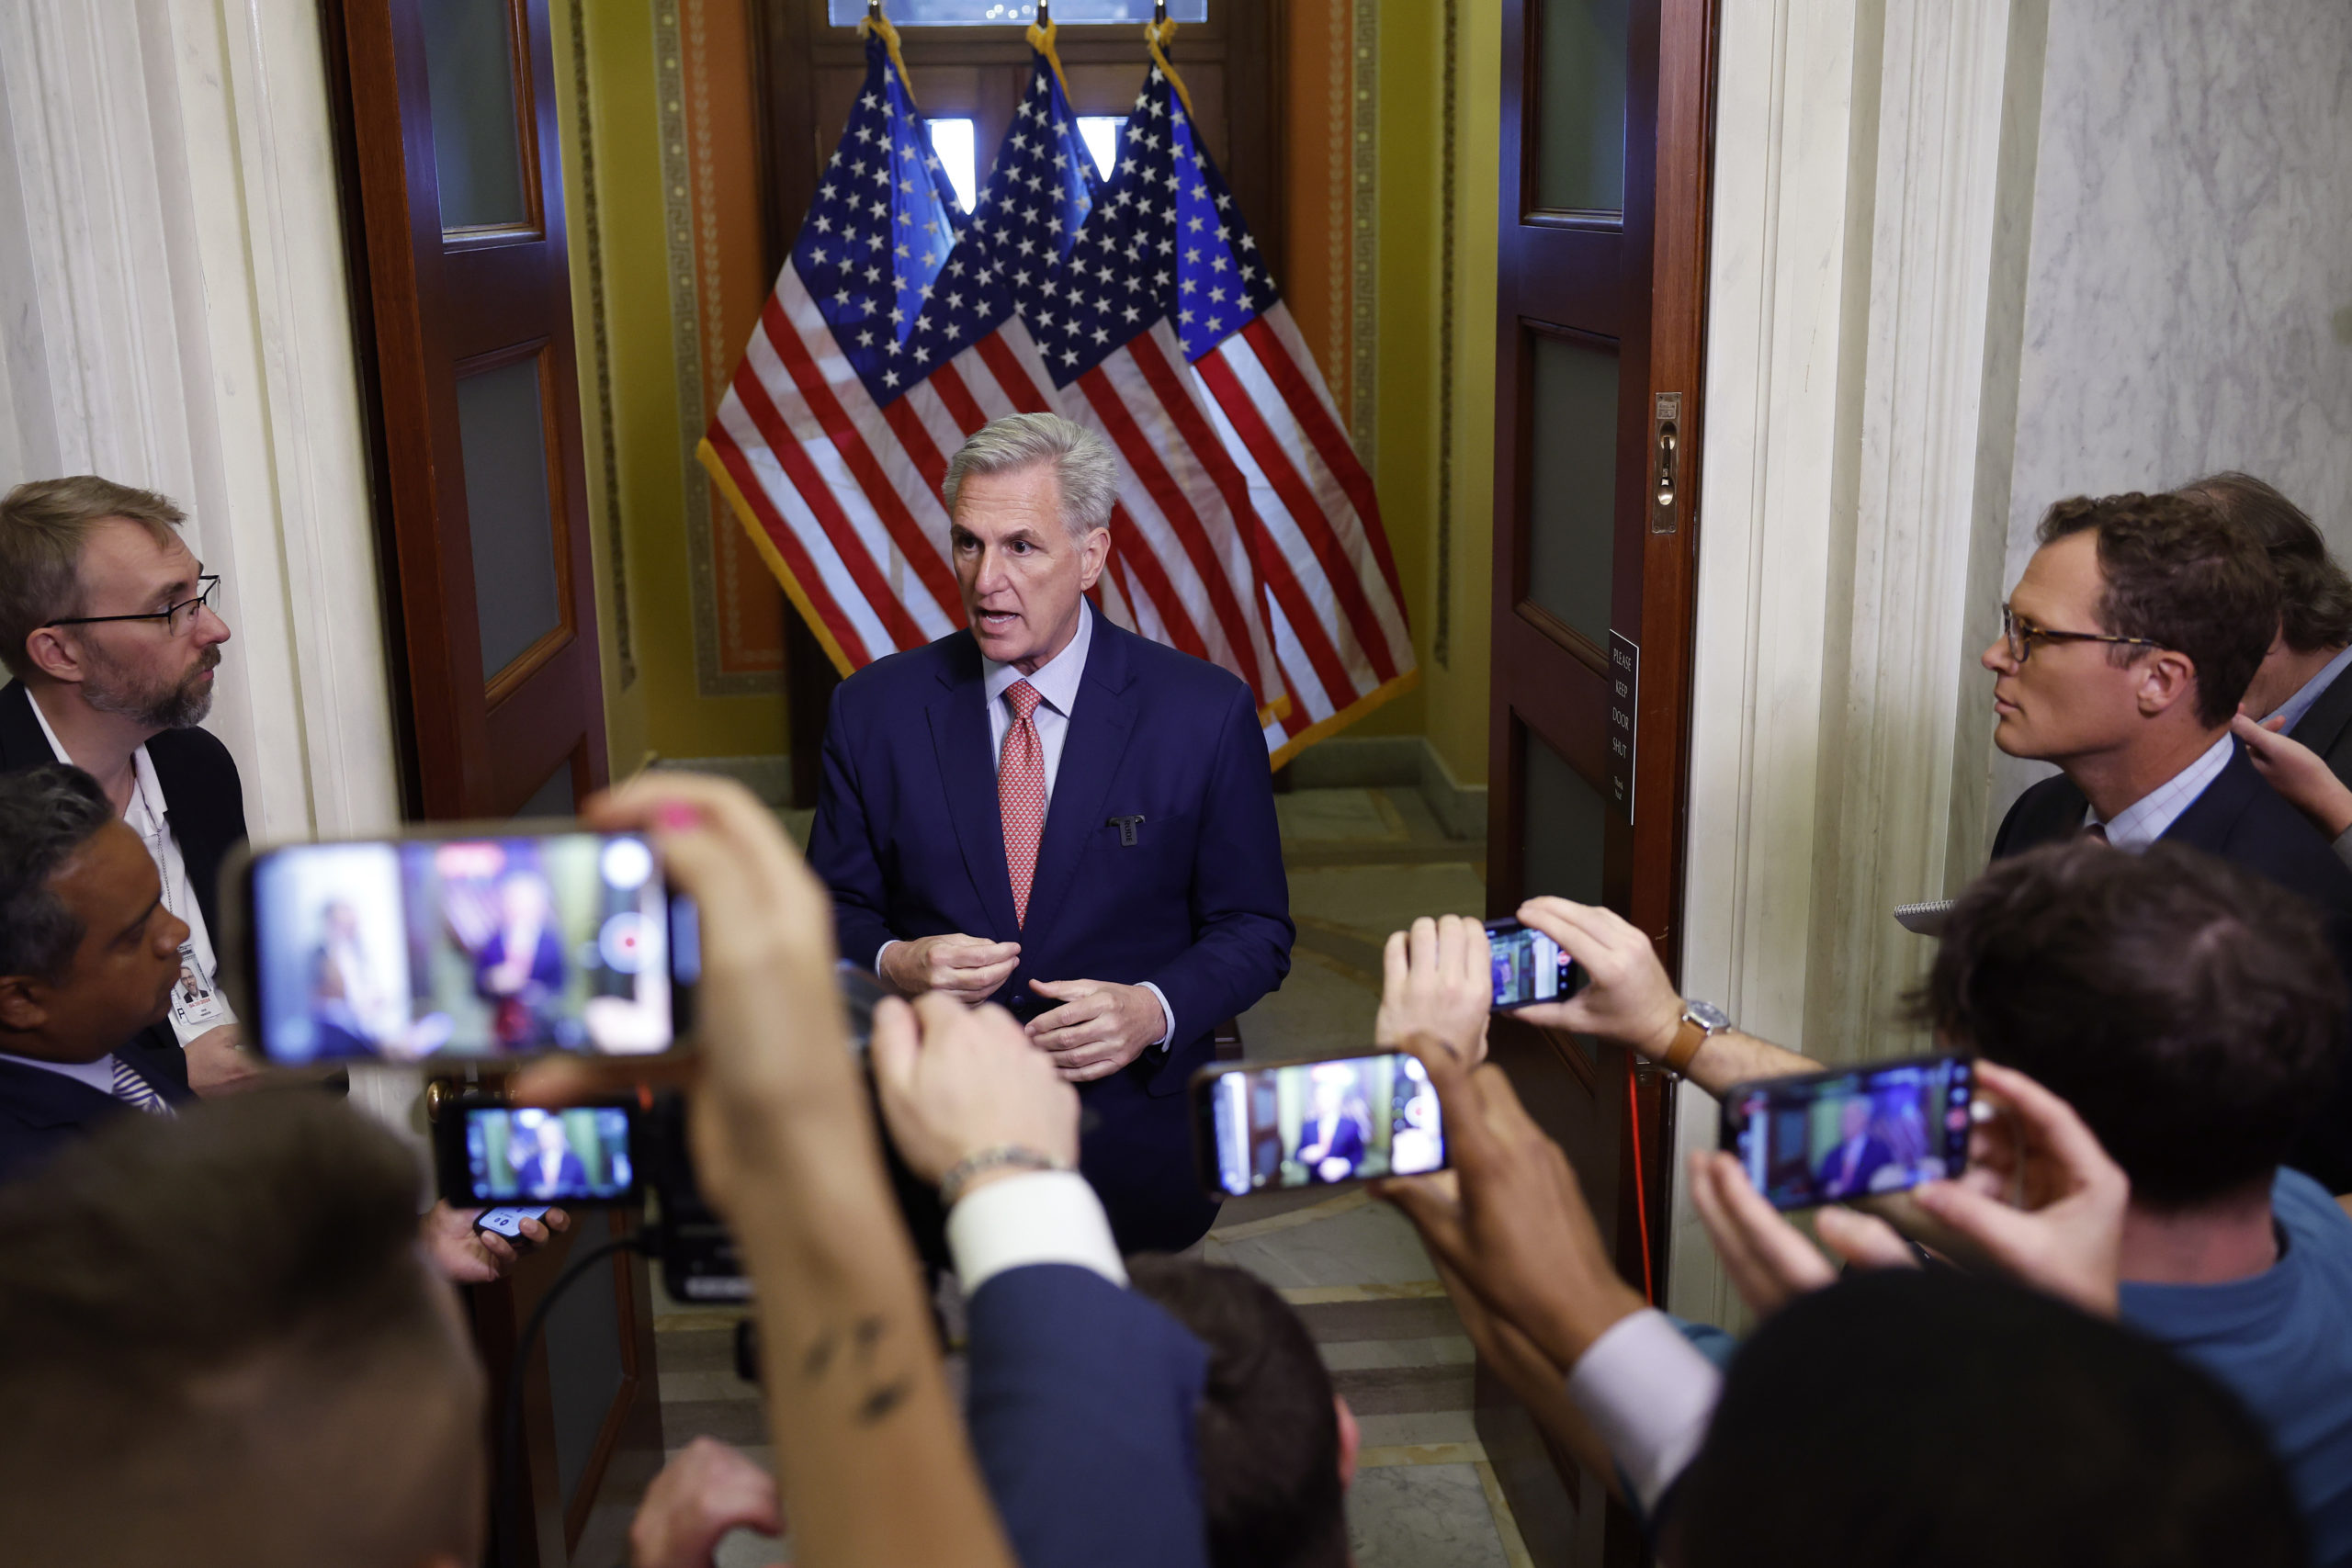 Reporters use their cell phones to film U.S. Speaker of the House Kevin McCarthy (R-CA) speaking outside the Speakers Balcony at the U.S. Capitol Building on July 25, 2023 in Washington, DC. McCarthy held the media availability with reporters to discuss a potential impeachment inquiry against U.S. President Joe Biden that would focus on the Biden family's alleged financial misconduct. (Photo by Anna Moneymaker/Getty Images)